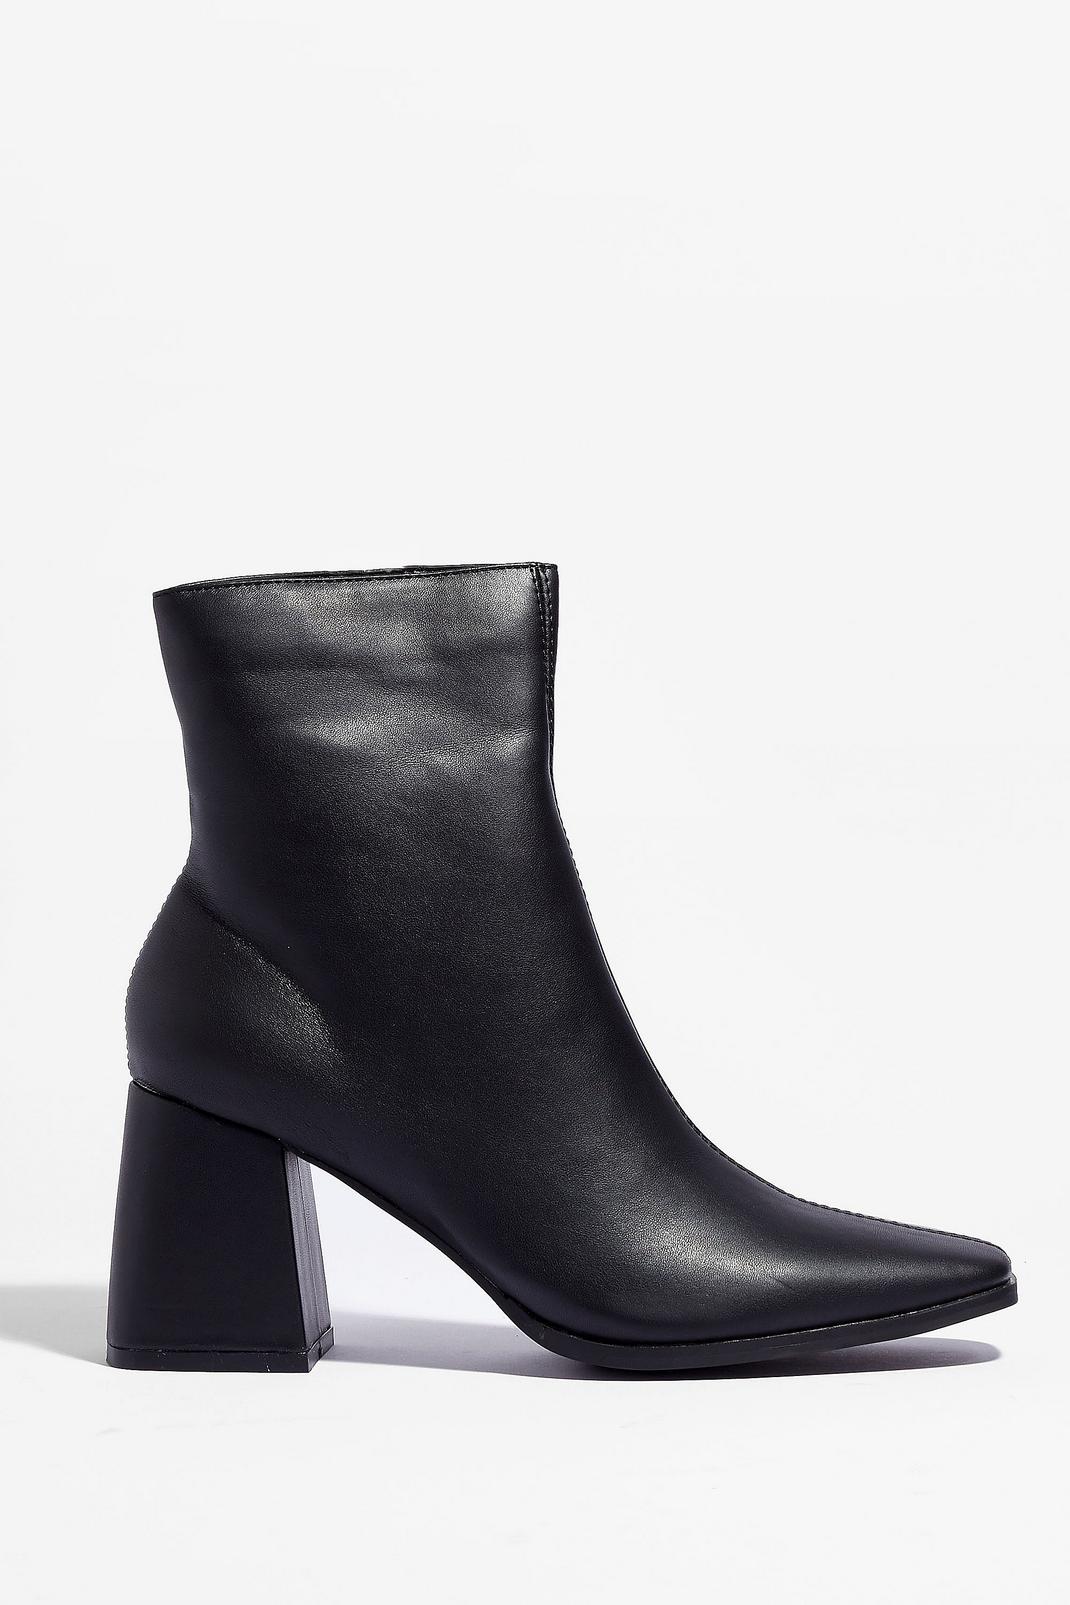 Flared Heel Faux Leather Ankle Boots | Nasty Gal